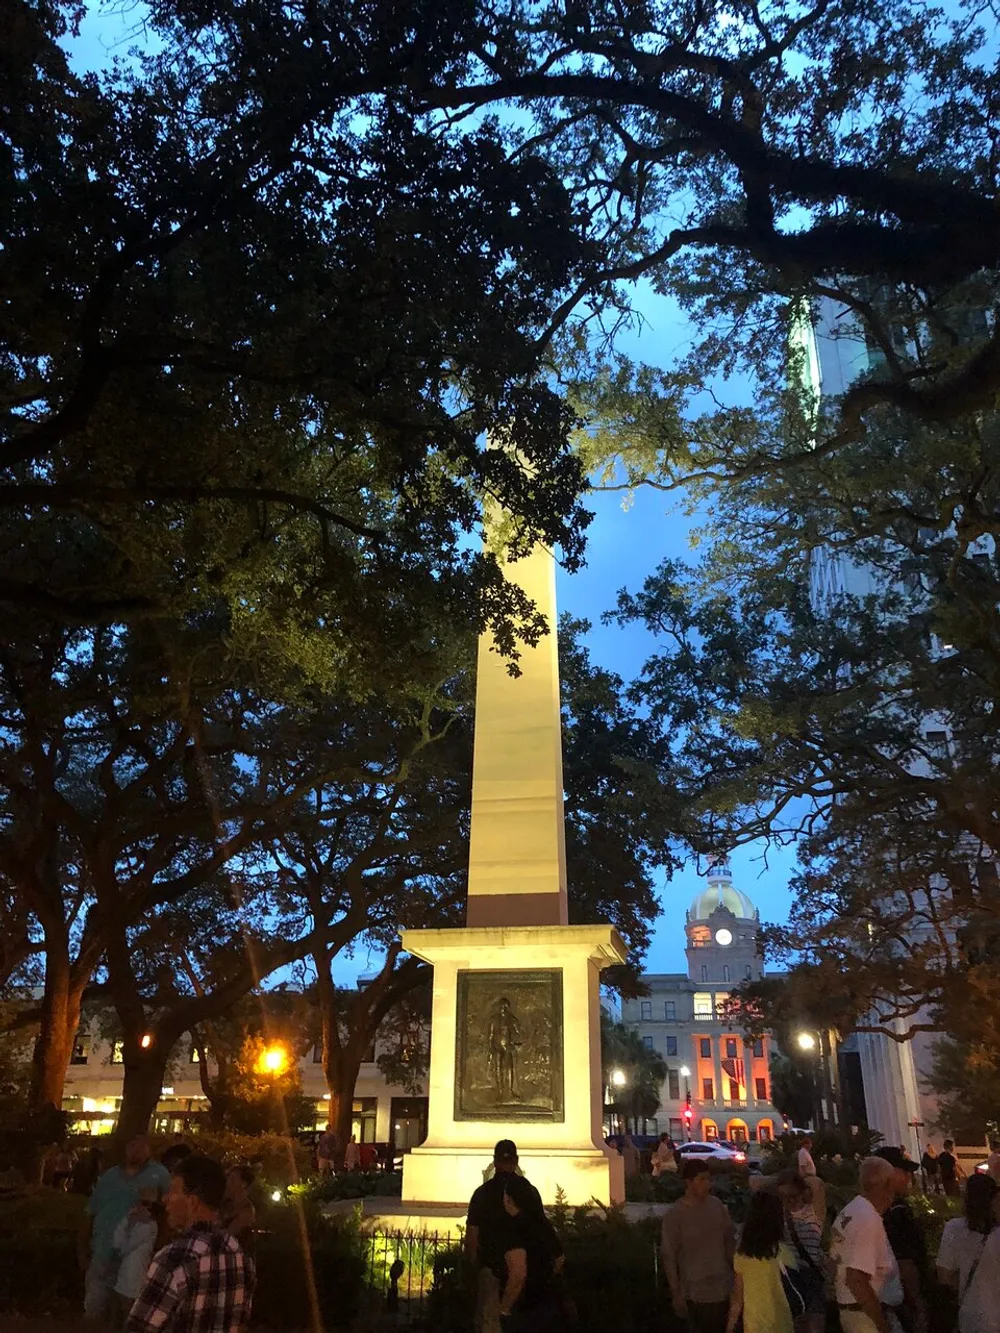 The image presents a bustling evening scene in a park with an obelisk monument surrounded by mature trees and illuminated by ambient street lights with a clock tower in the background